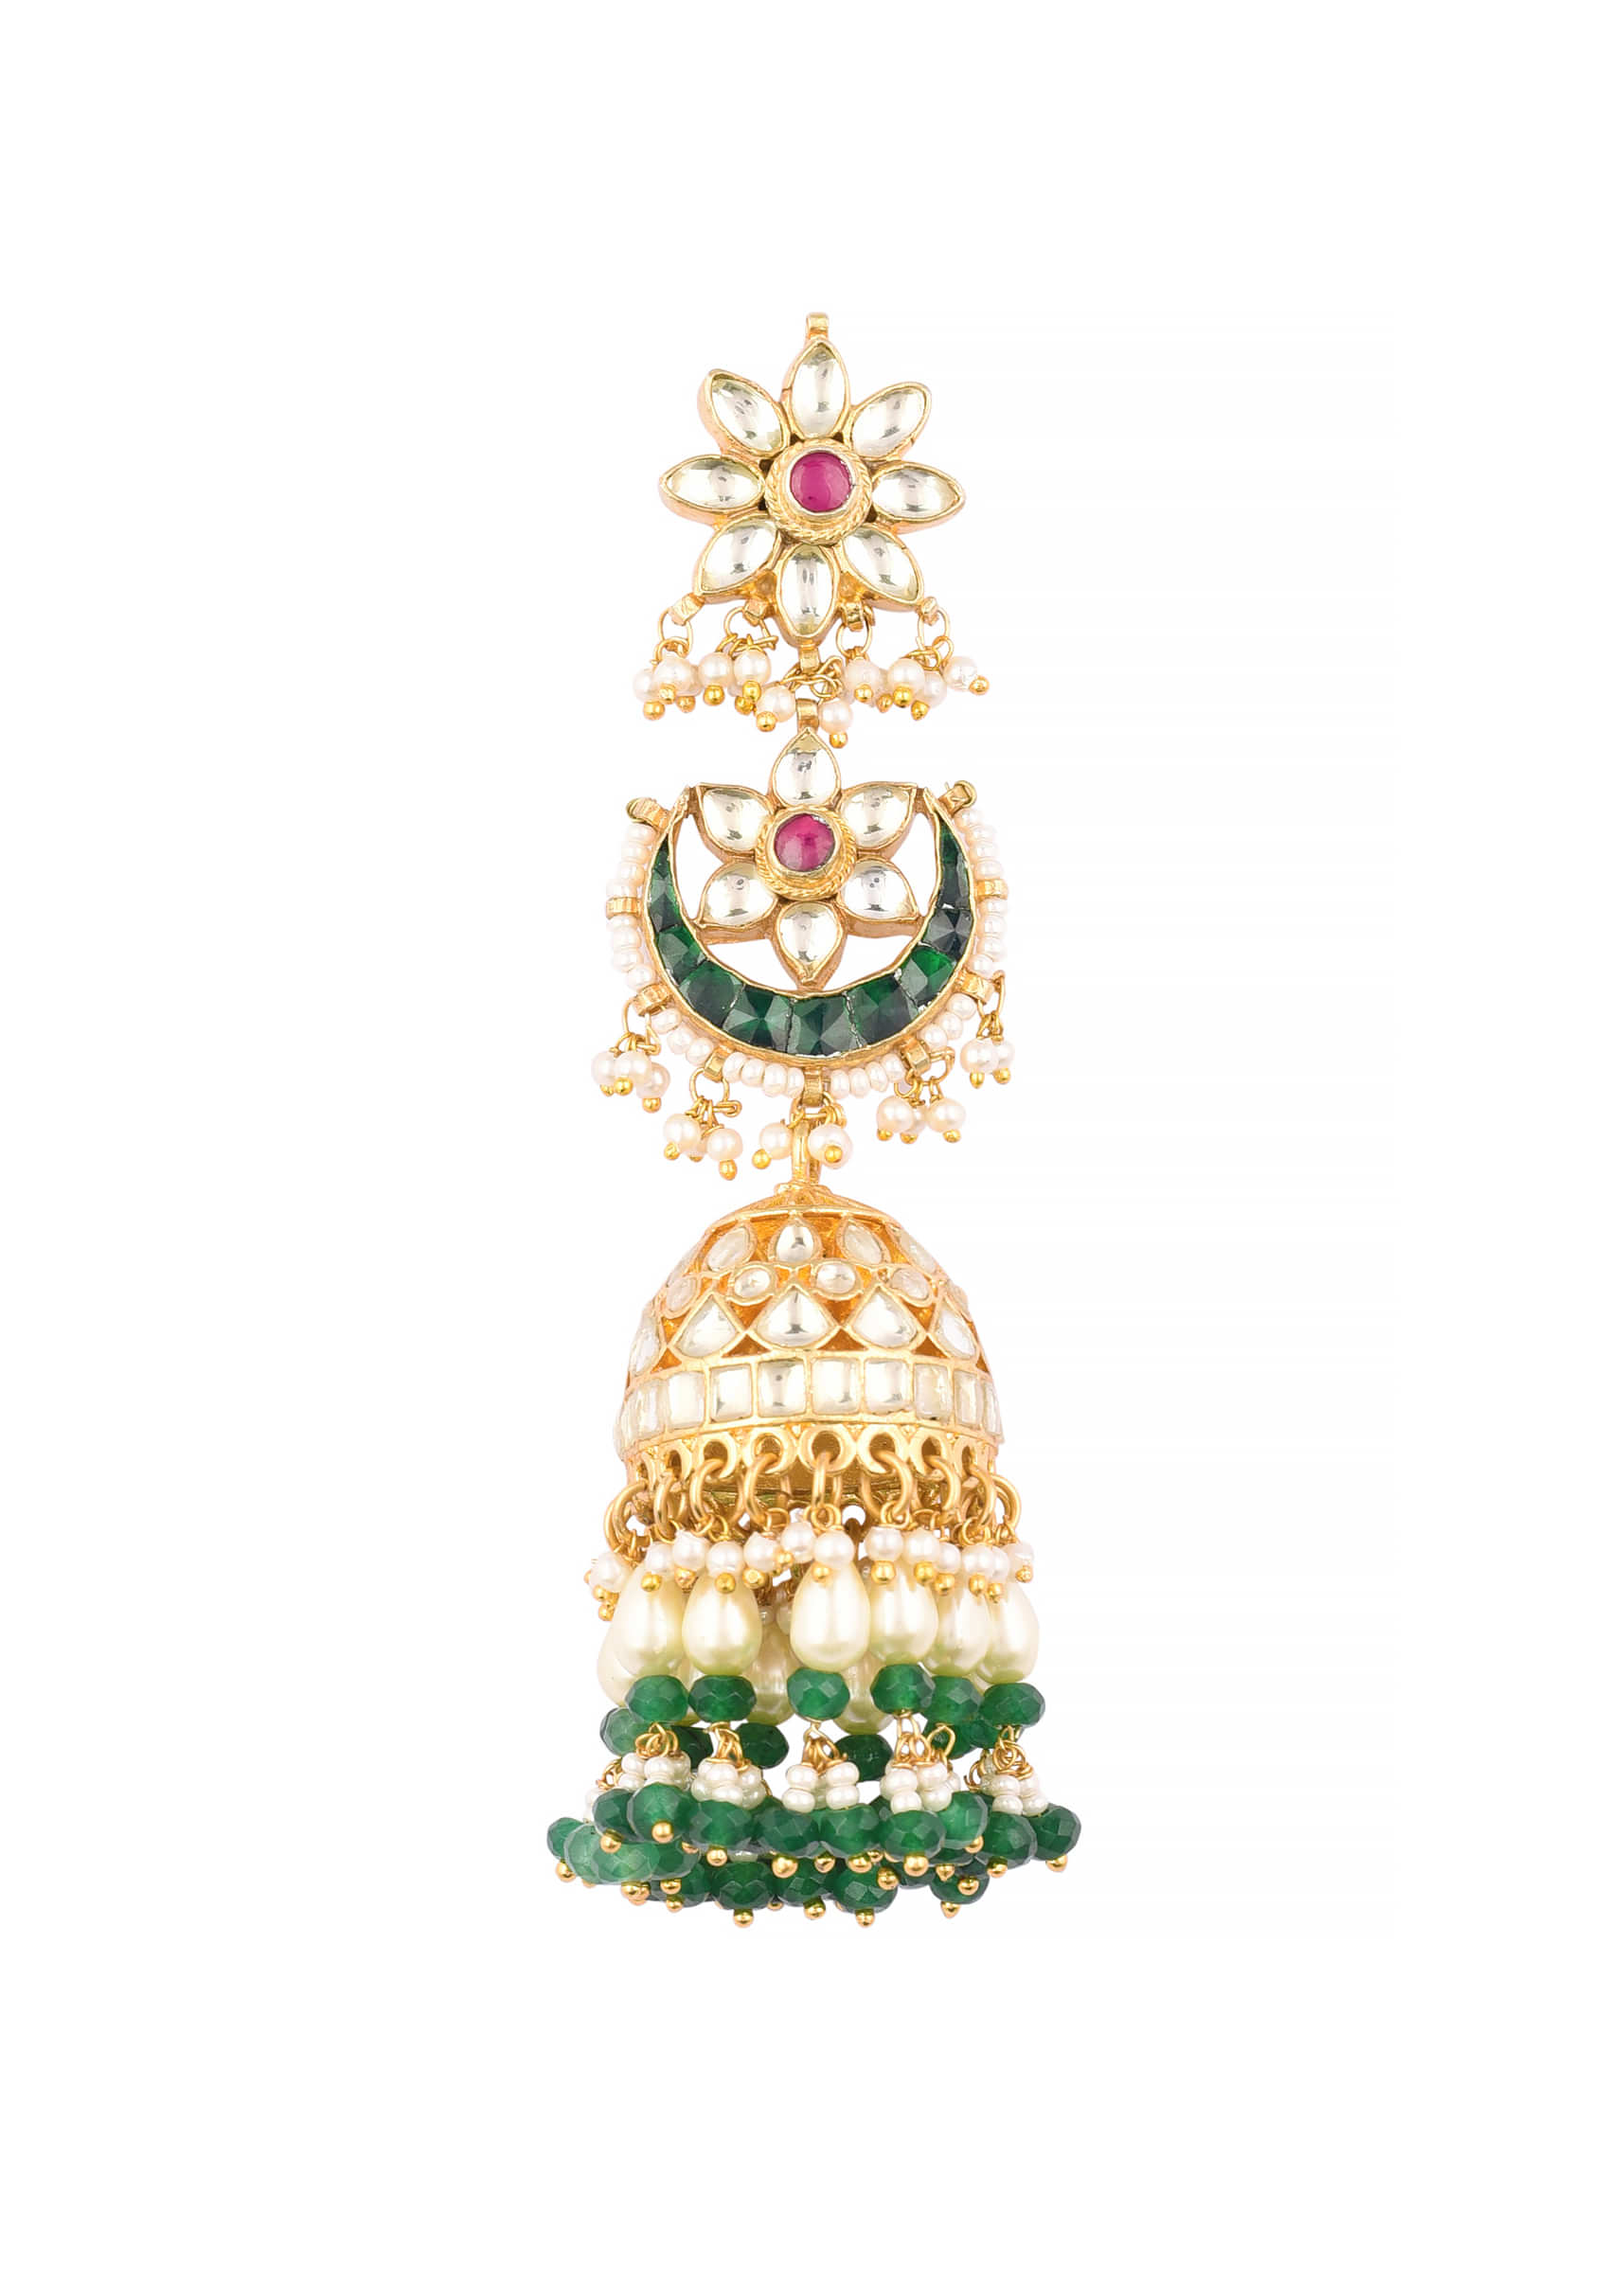 Gold Finish Kundan Polki Dangling Earrings With Beads And Green-Red Stones